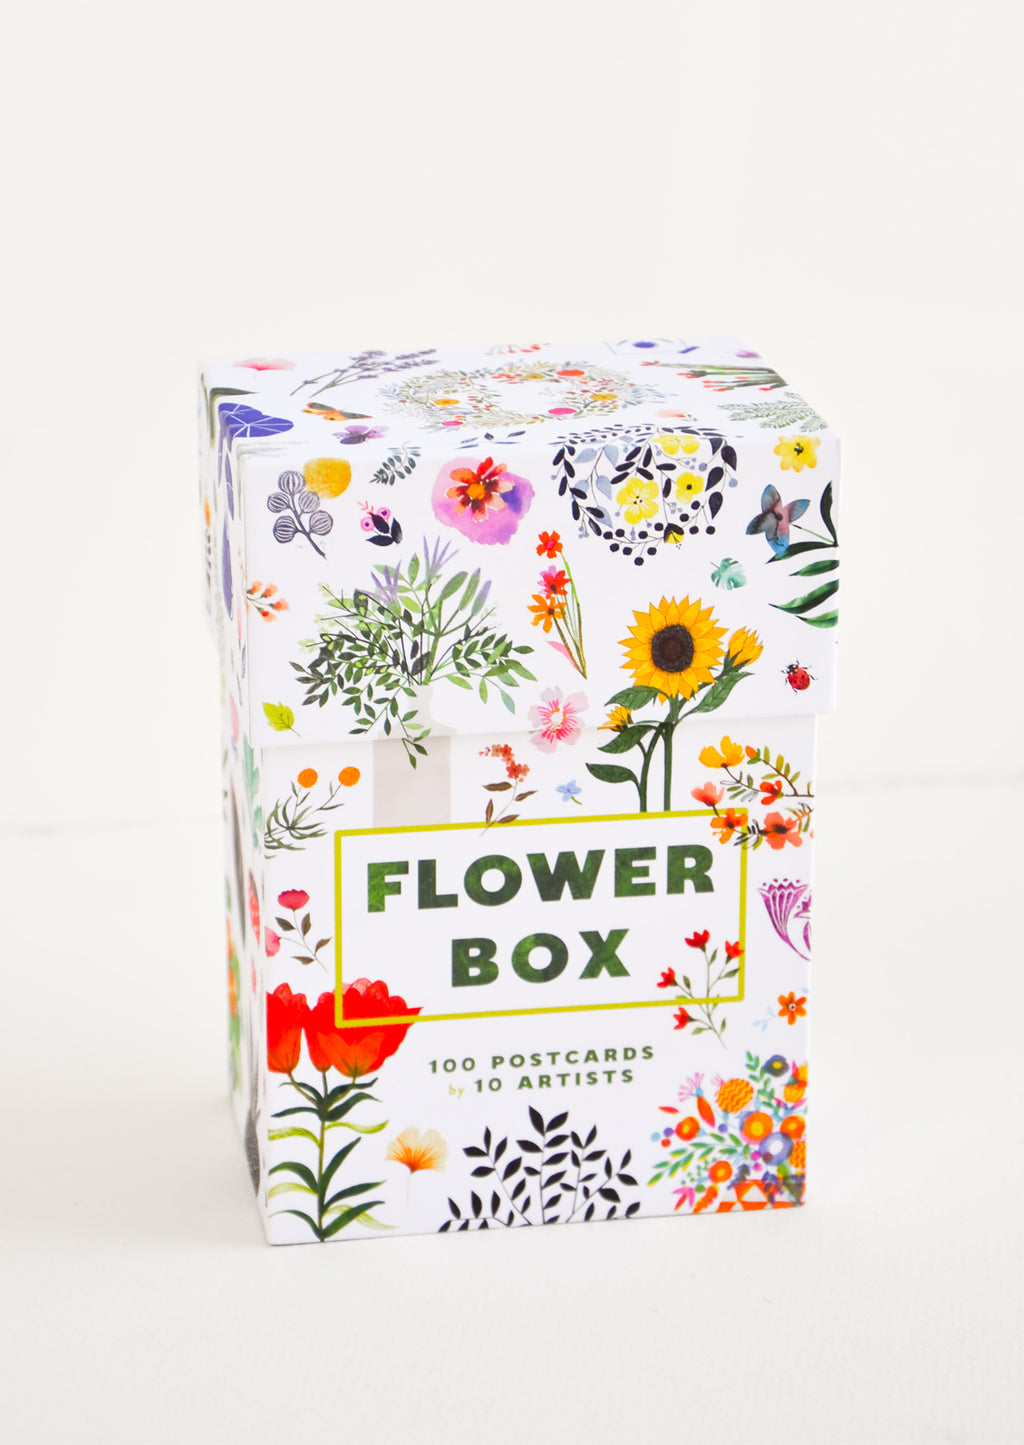 1: Outside of a box of floral notecards, with drawings of flowers and the text "Flower Box".